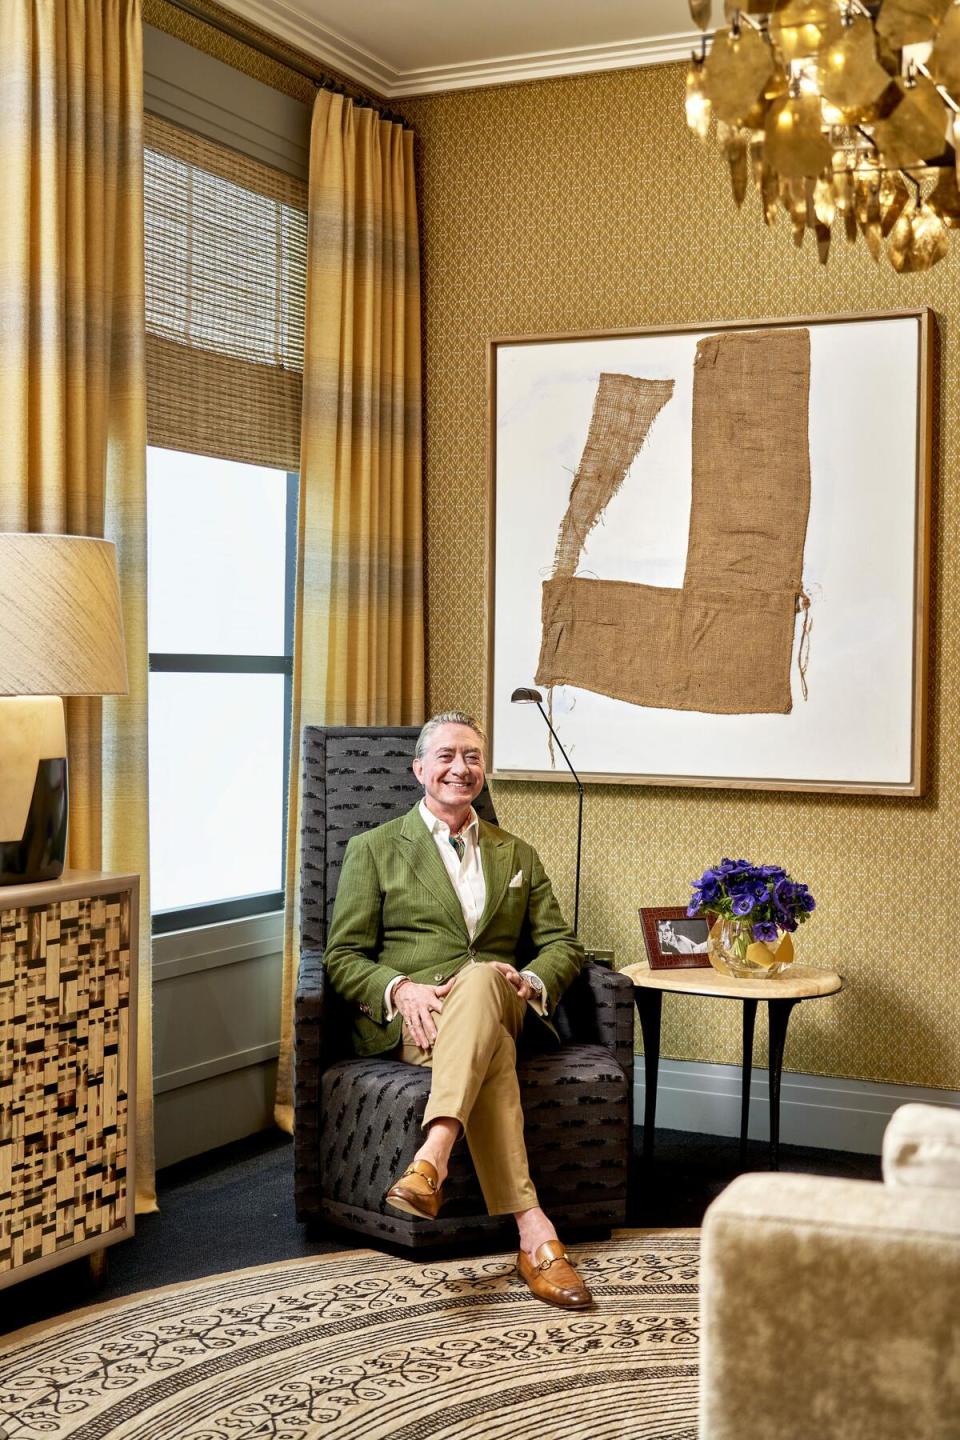 A soothing palette of amber, beige and bronze plus swathes of soft-to-the-touch silk and mohair make Timothy Mather’s day room a warm and cozy sanctorium